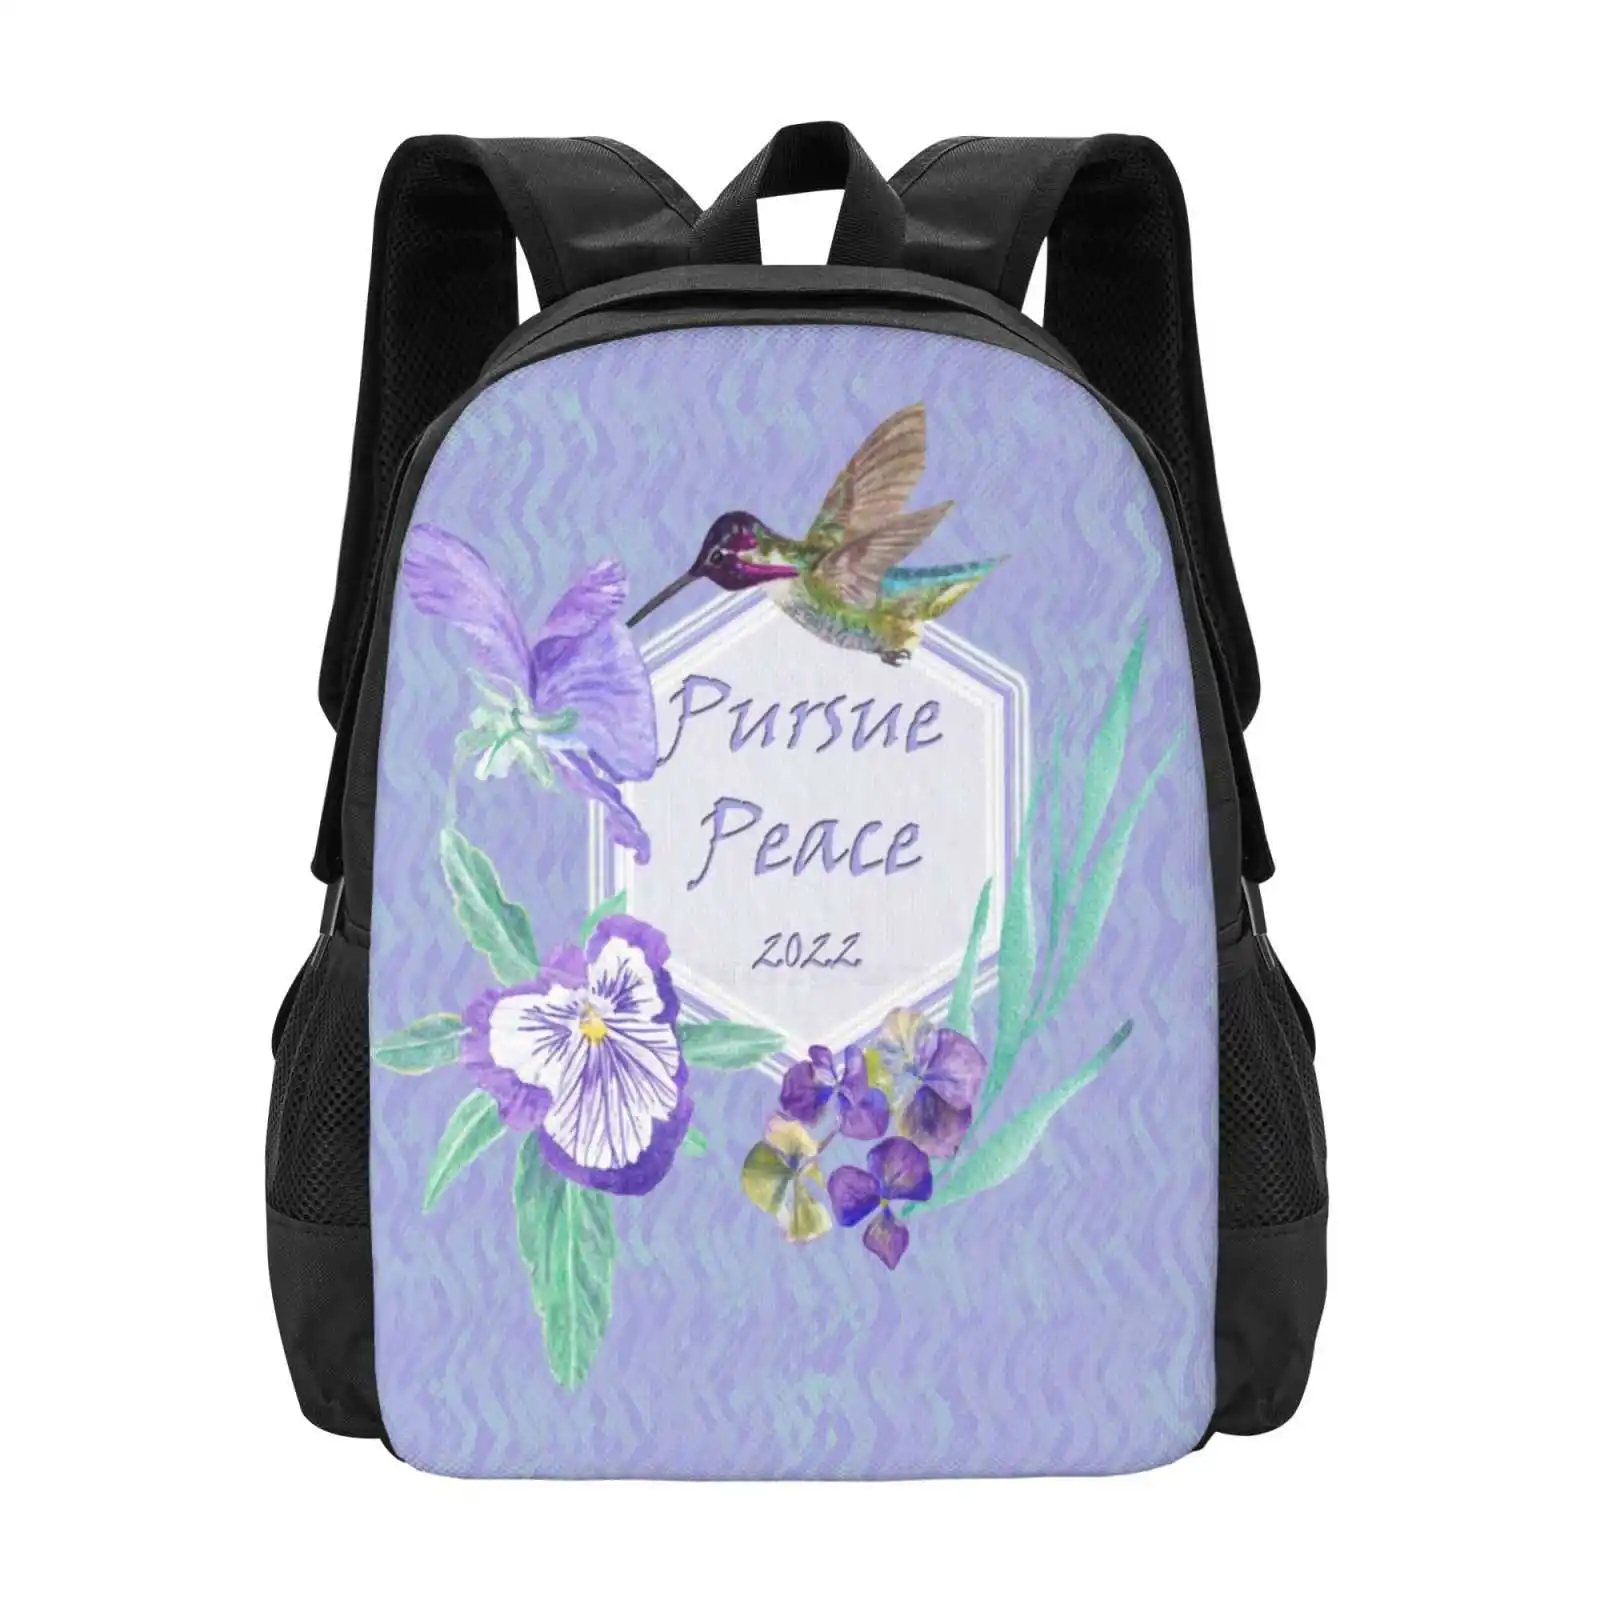 

Pursue Peace Fashion Pattern Design Travel Laptop School Backpack Bag Pursue Peace Jw Arts And Crafts Hand Painted Yellow